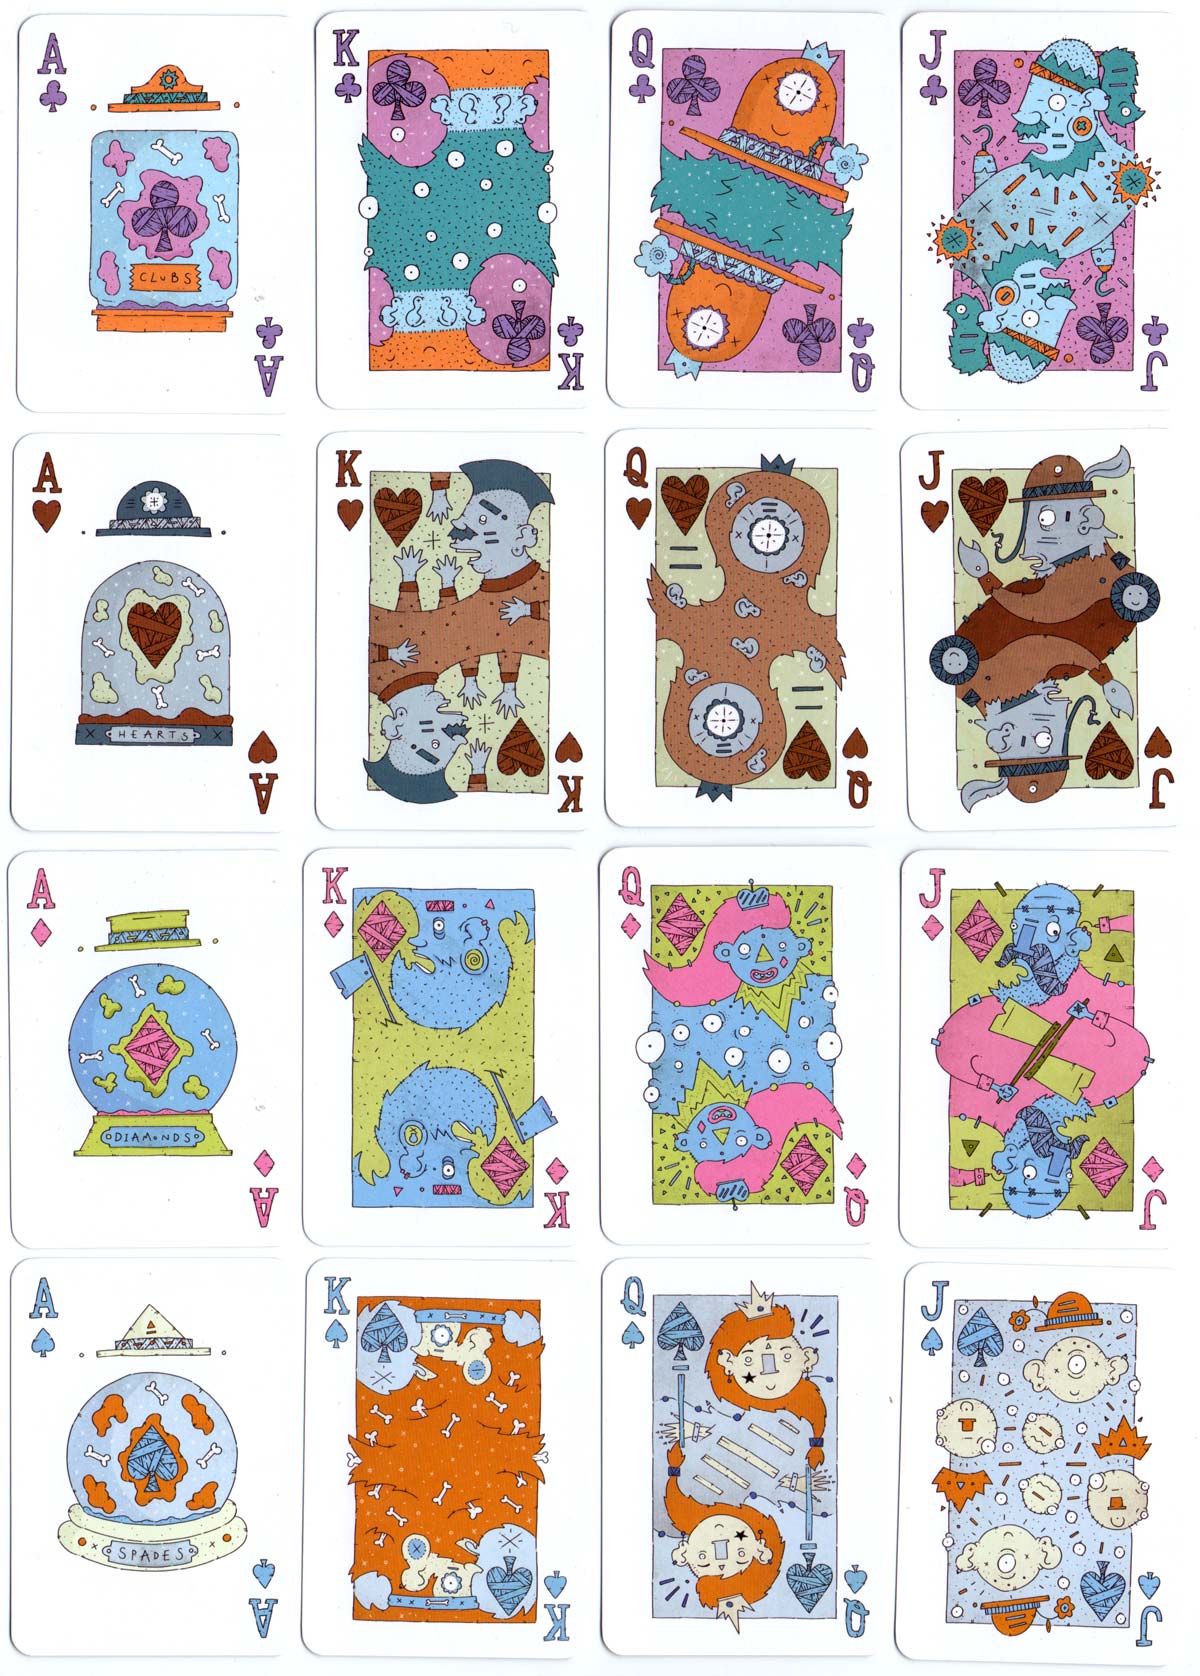 GoFishFriday Playing Cards designed and created by Daniel Campbell, 2015